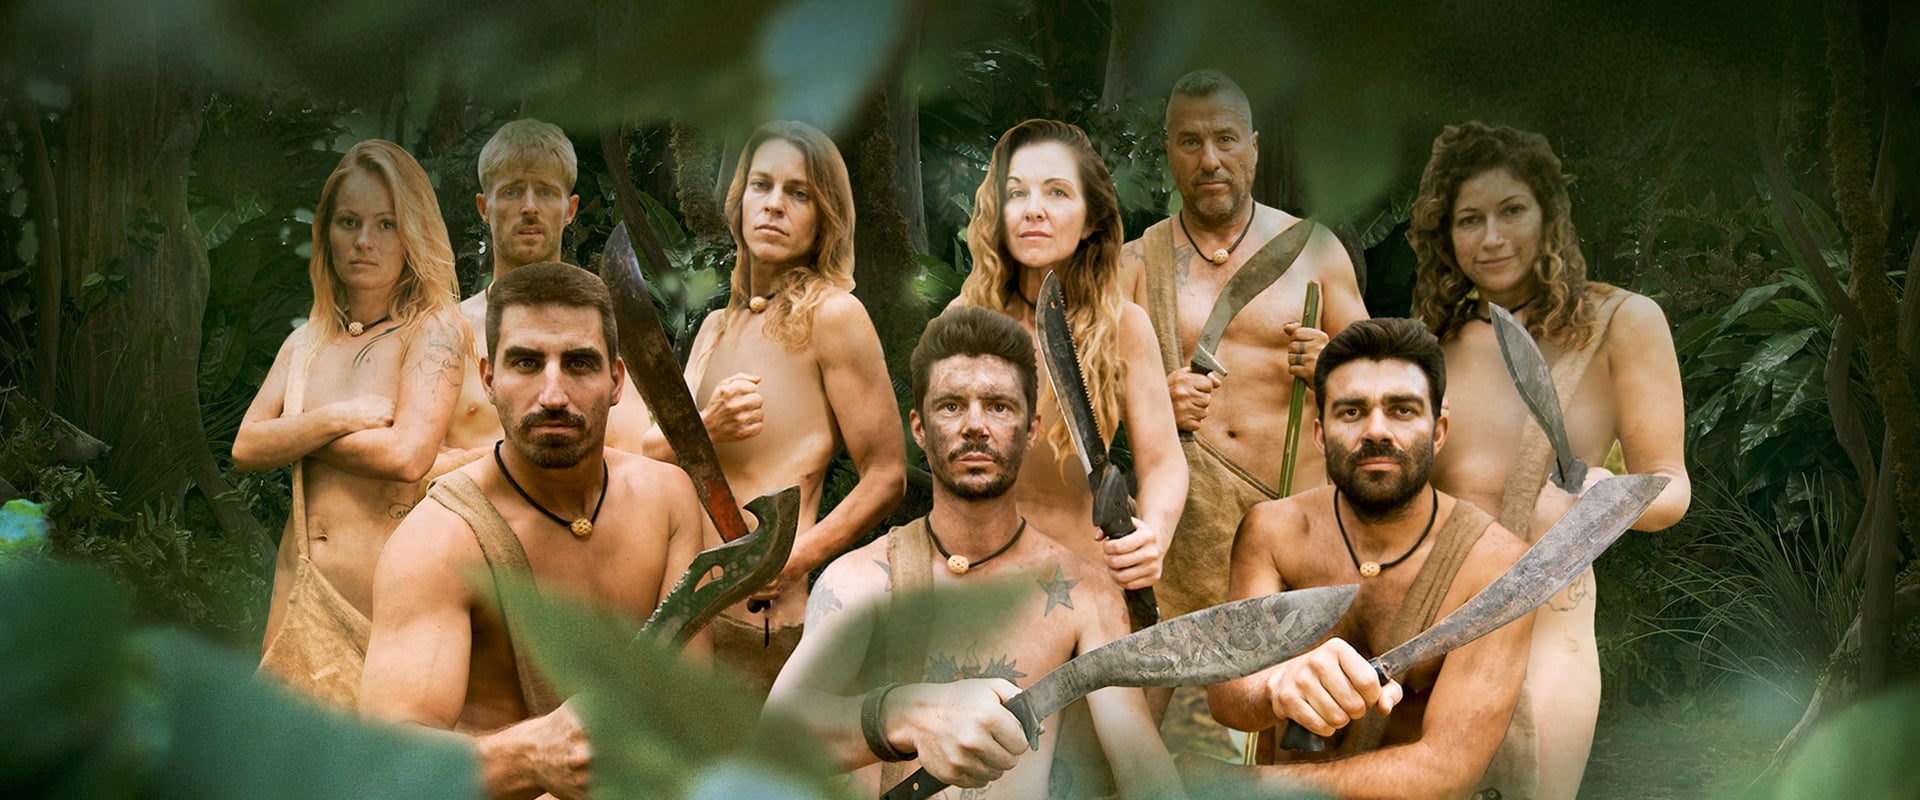 Where to stream Naked and Afraid XL? | StreamHint